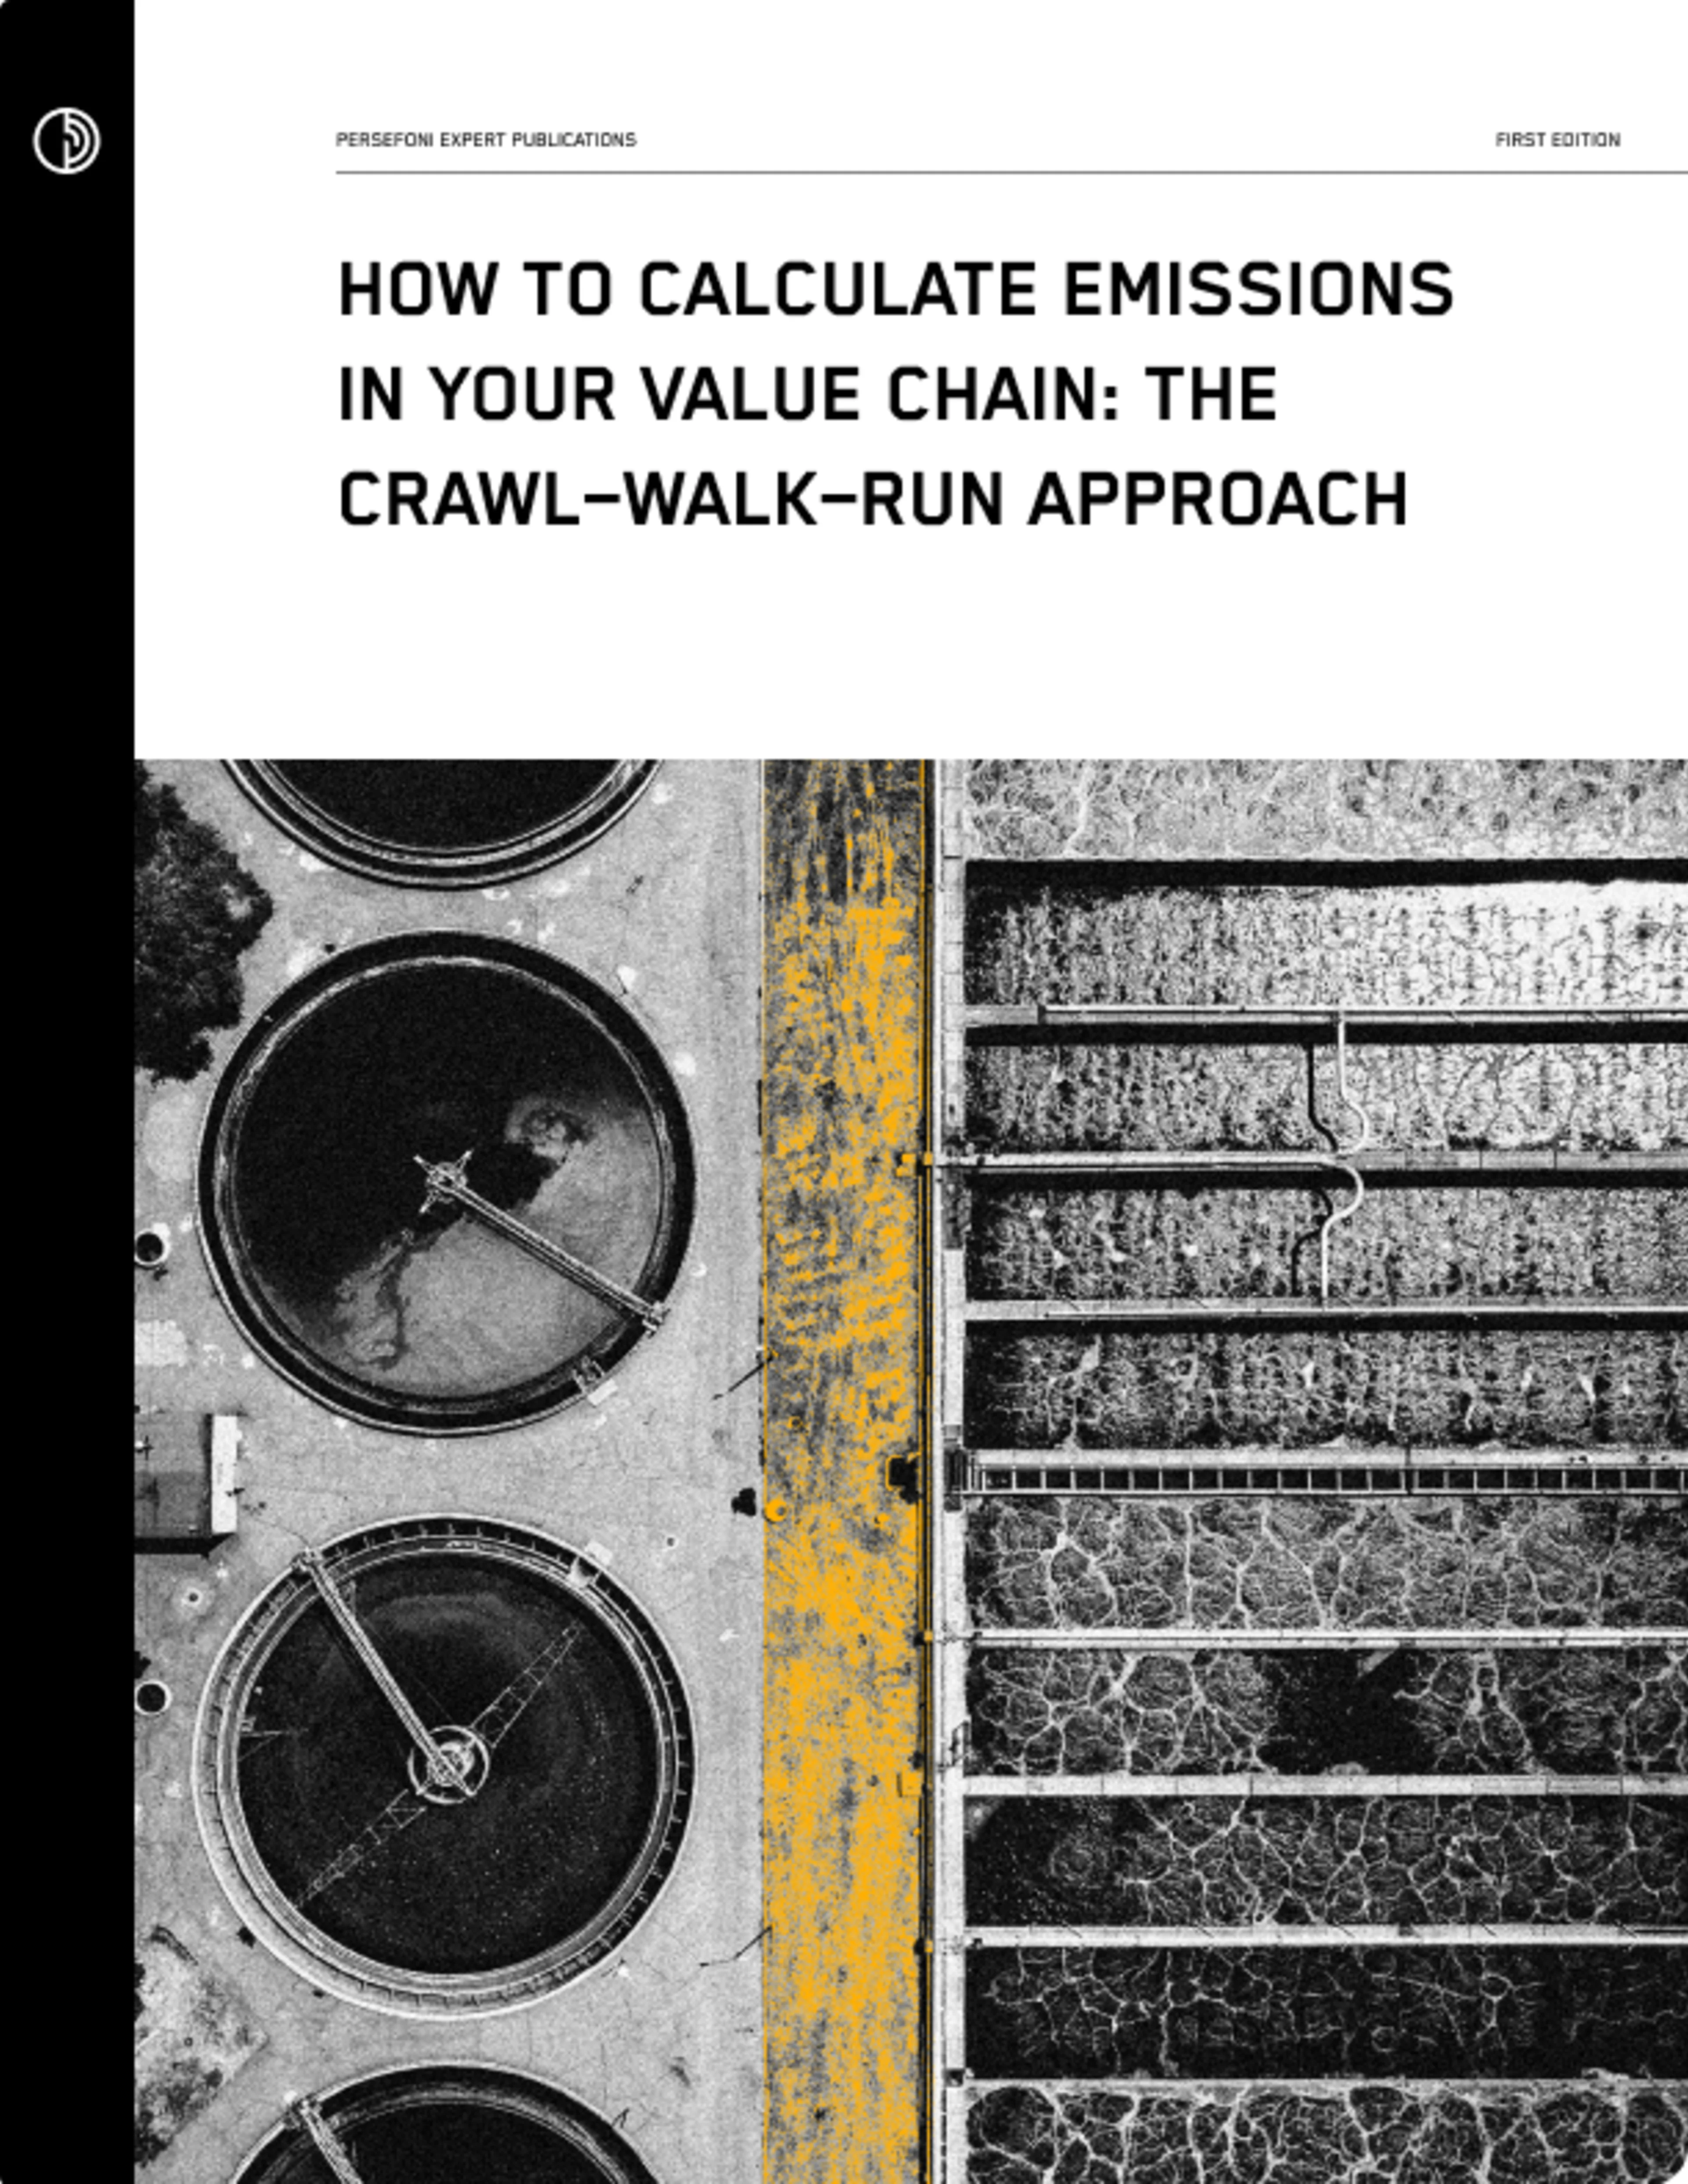 How to Calculate Emissions in Your Value Chain